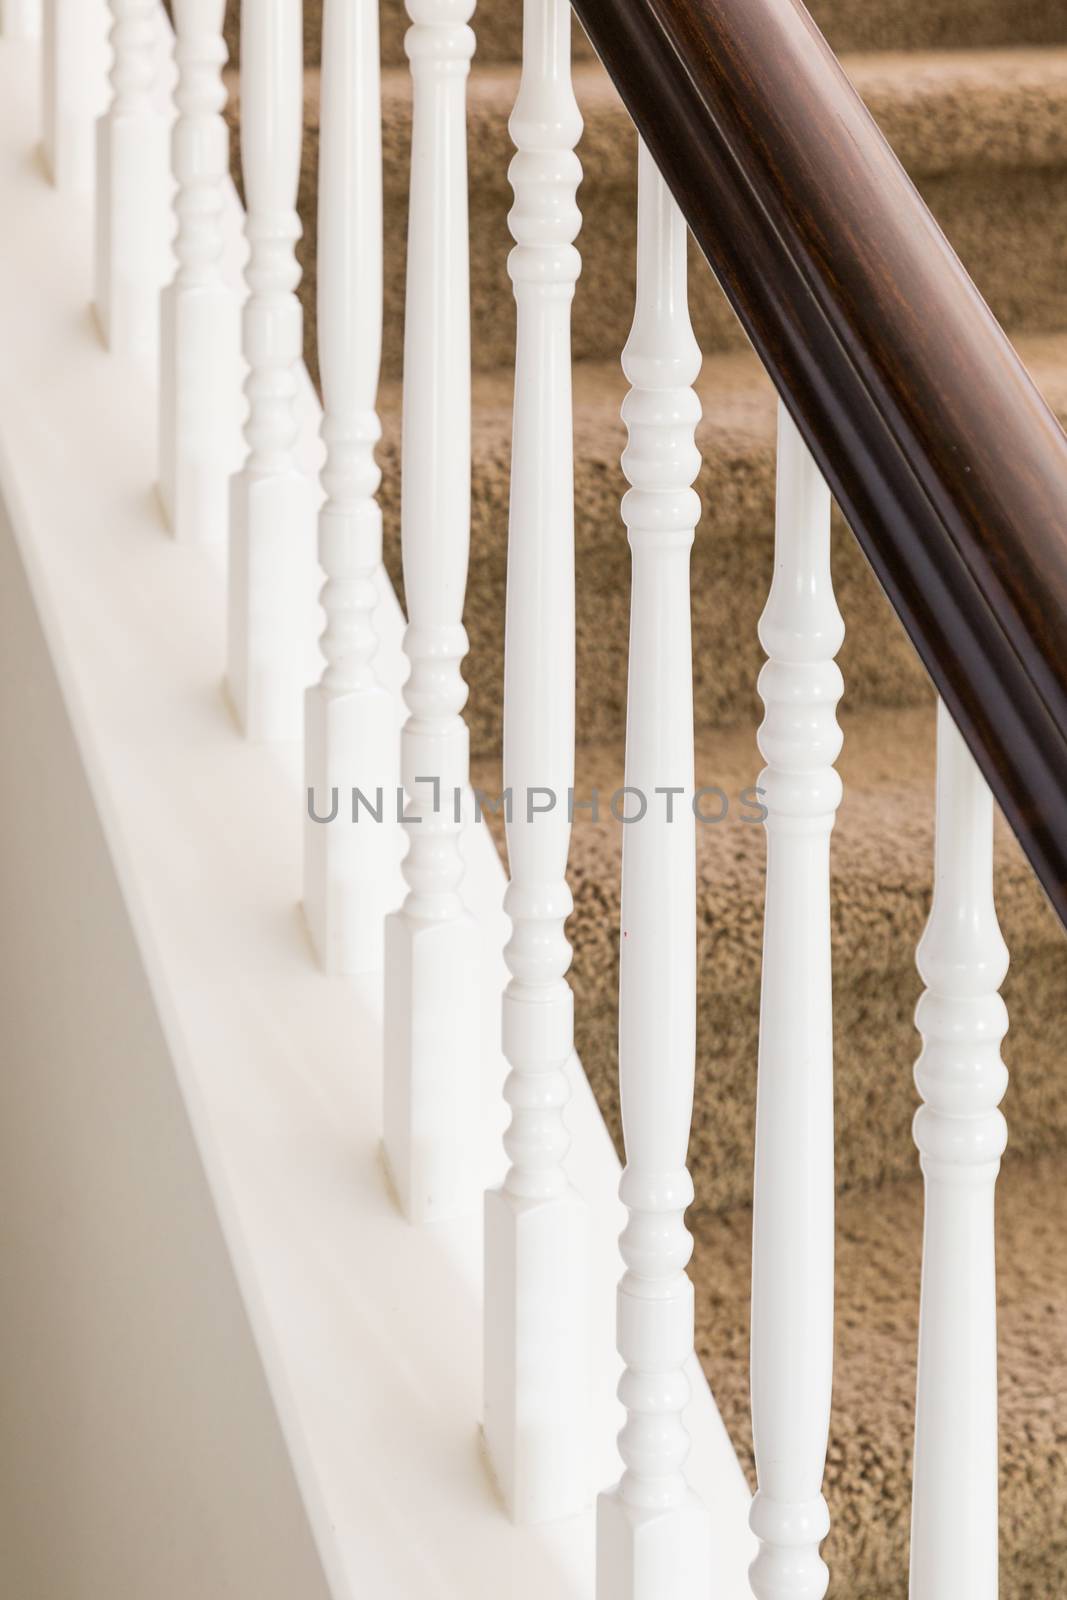 Abstract of Beautiful Stair Railing and Carpeted Steps in House.